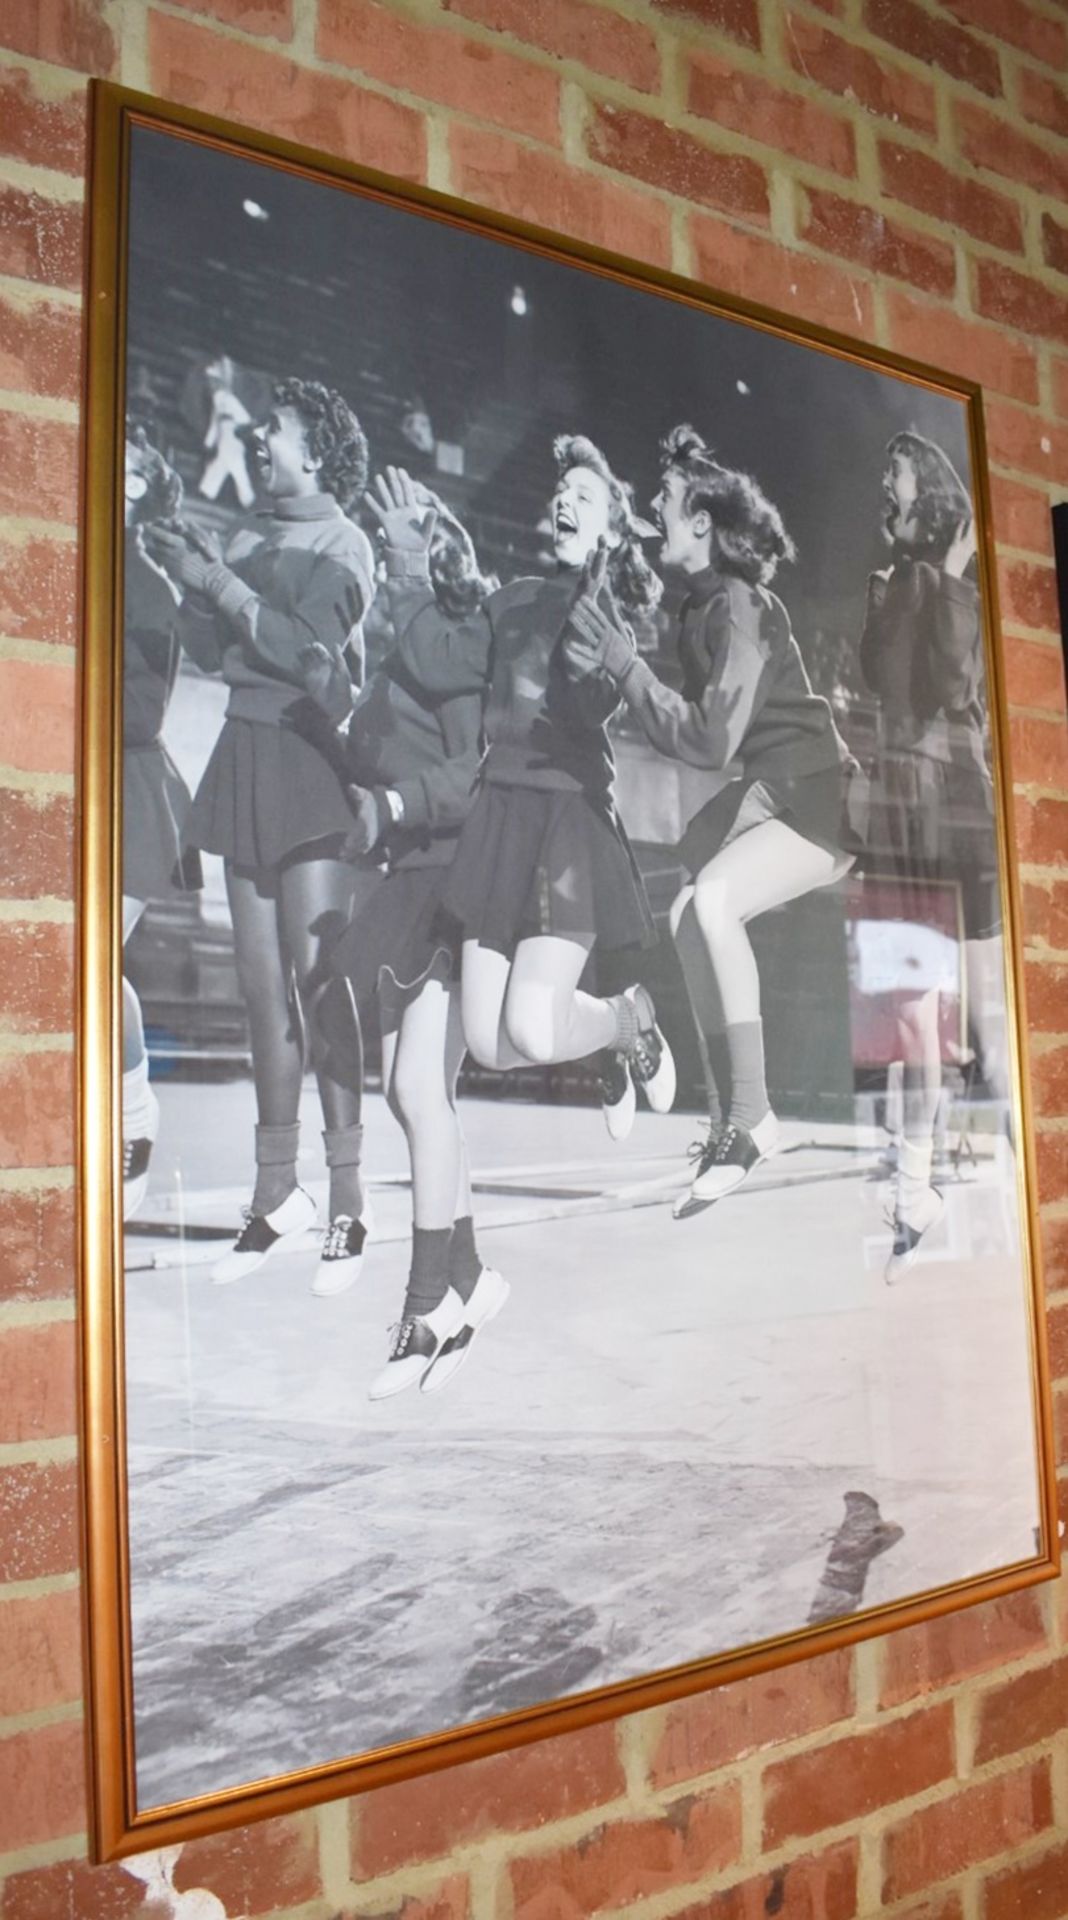 1 x Framed Picture Depicting Cheerleaders Celebrating - Size 107 x 85 cms - From Italian American